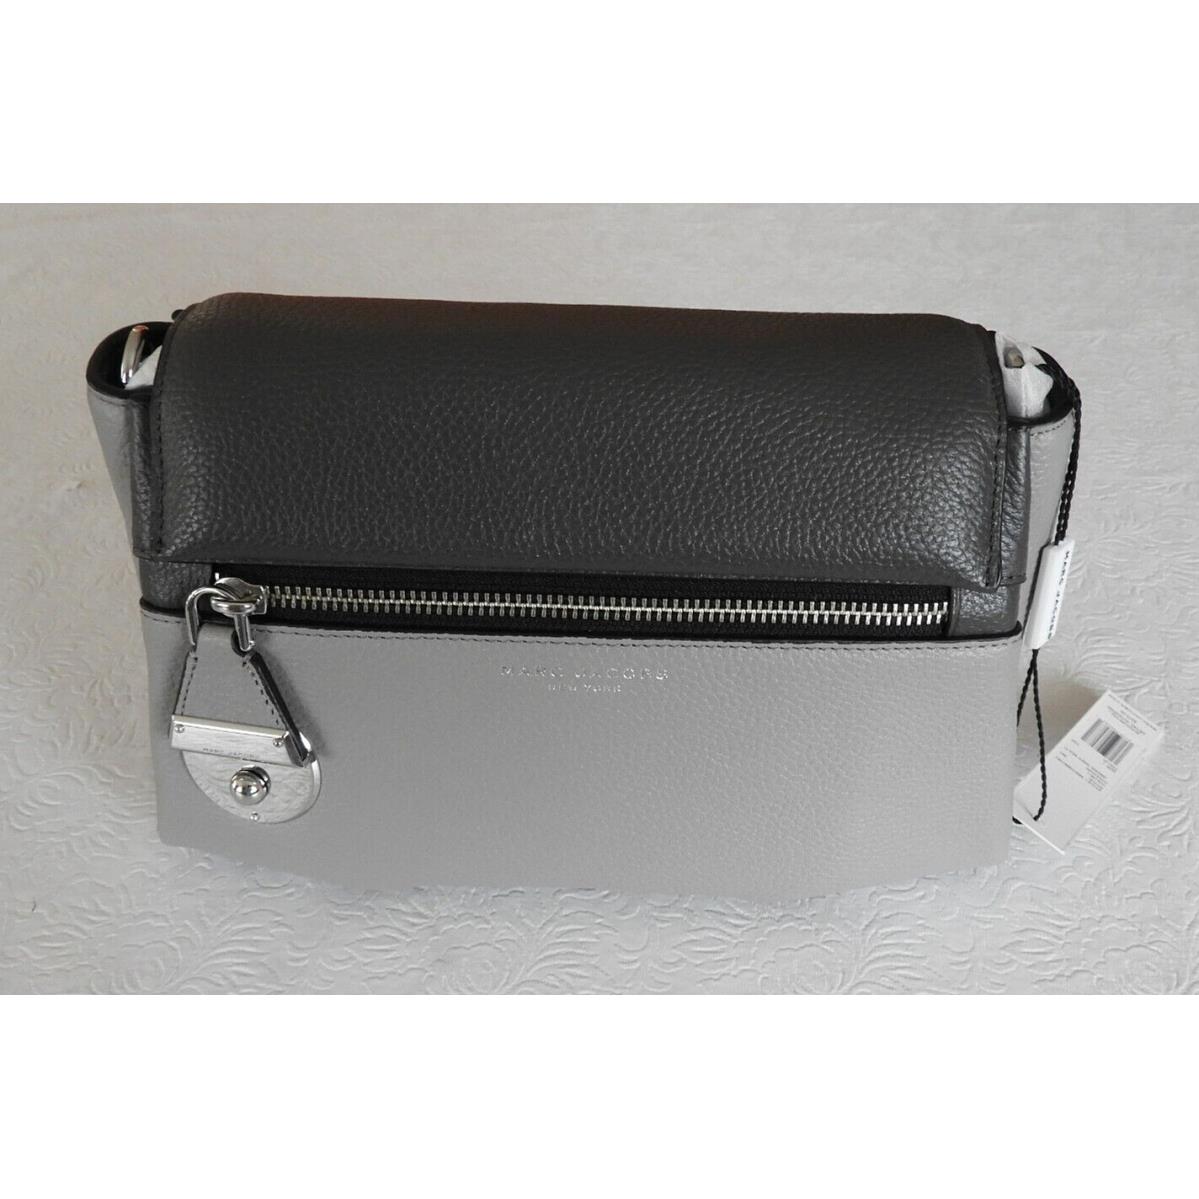 Marc Jacobs  bag   - Gray Handle/Strap, Silver Hardware, Black Lining 0